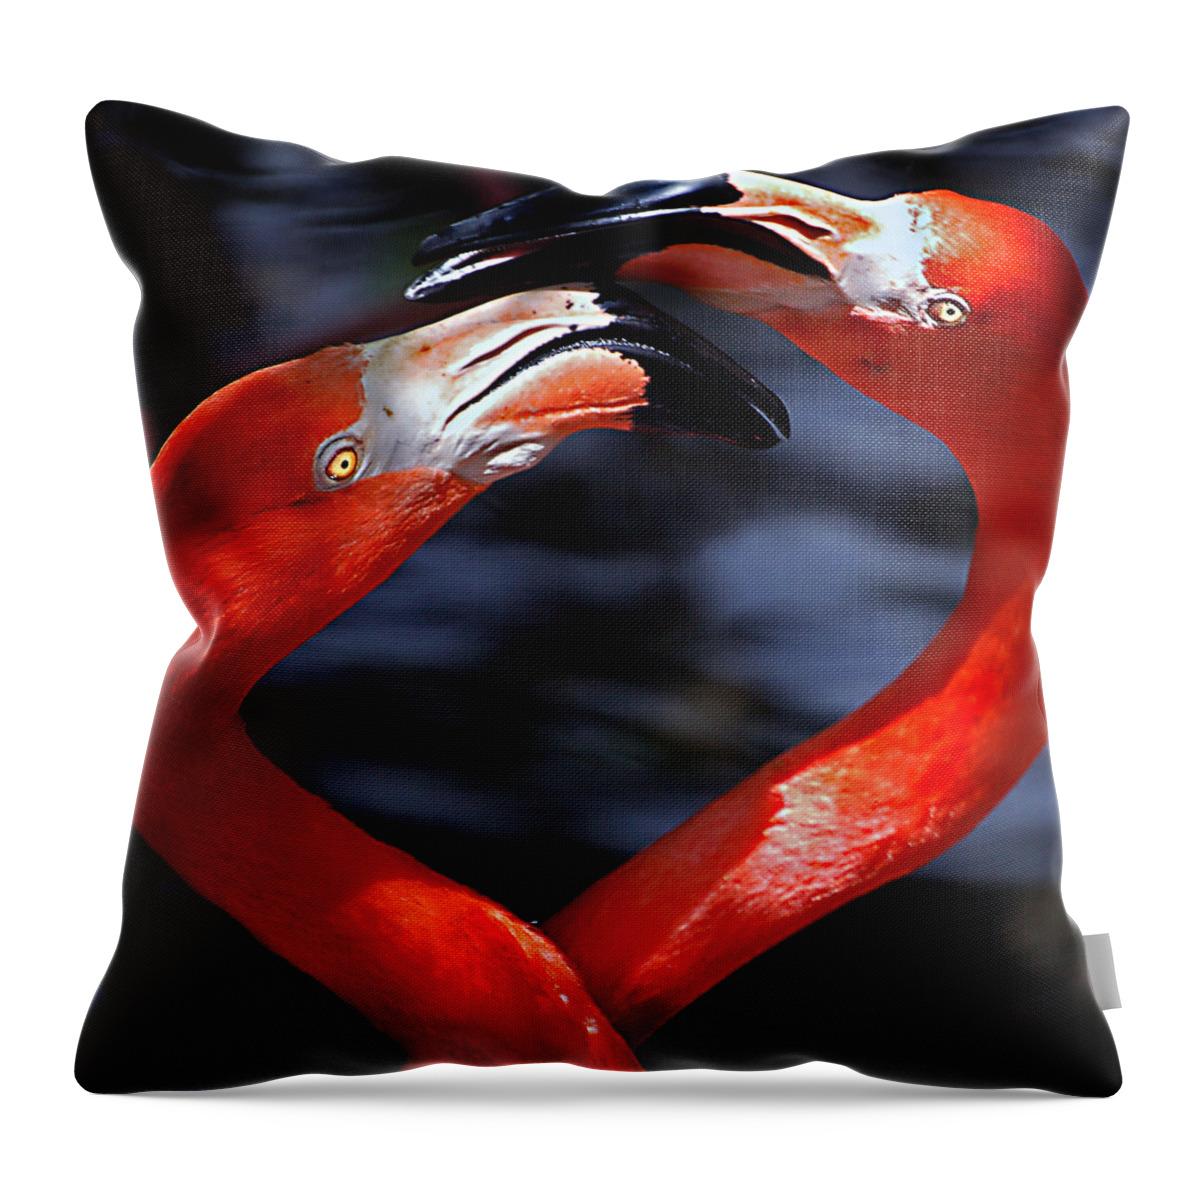 Donna Proctor Throw Pillow featuring the photograph Tangled In Love by Donna Proctor